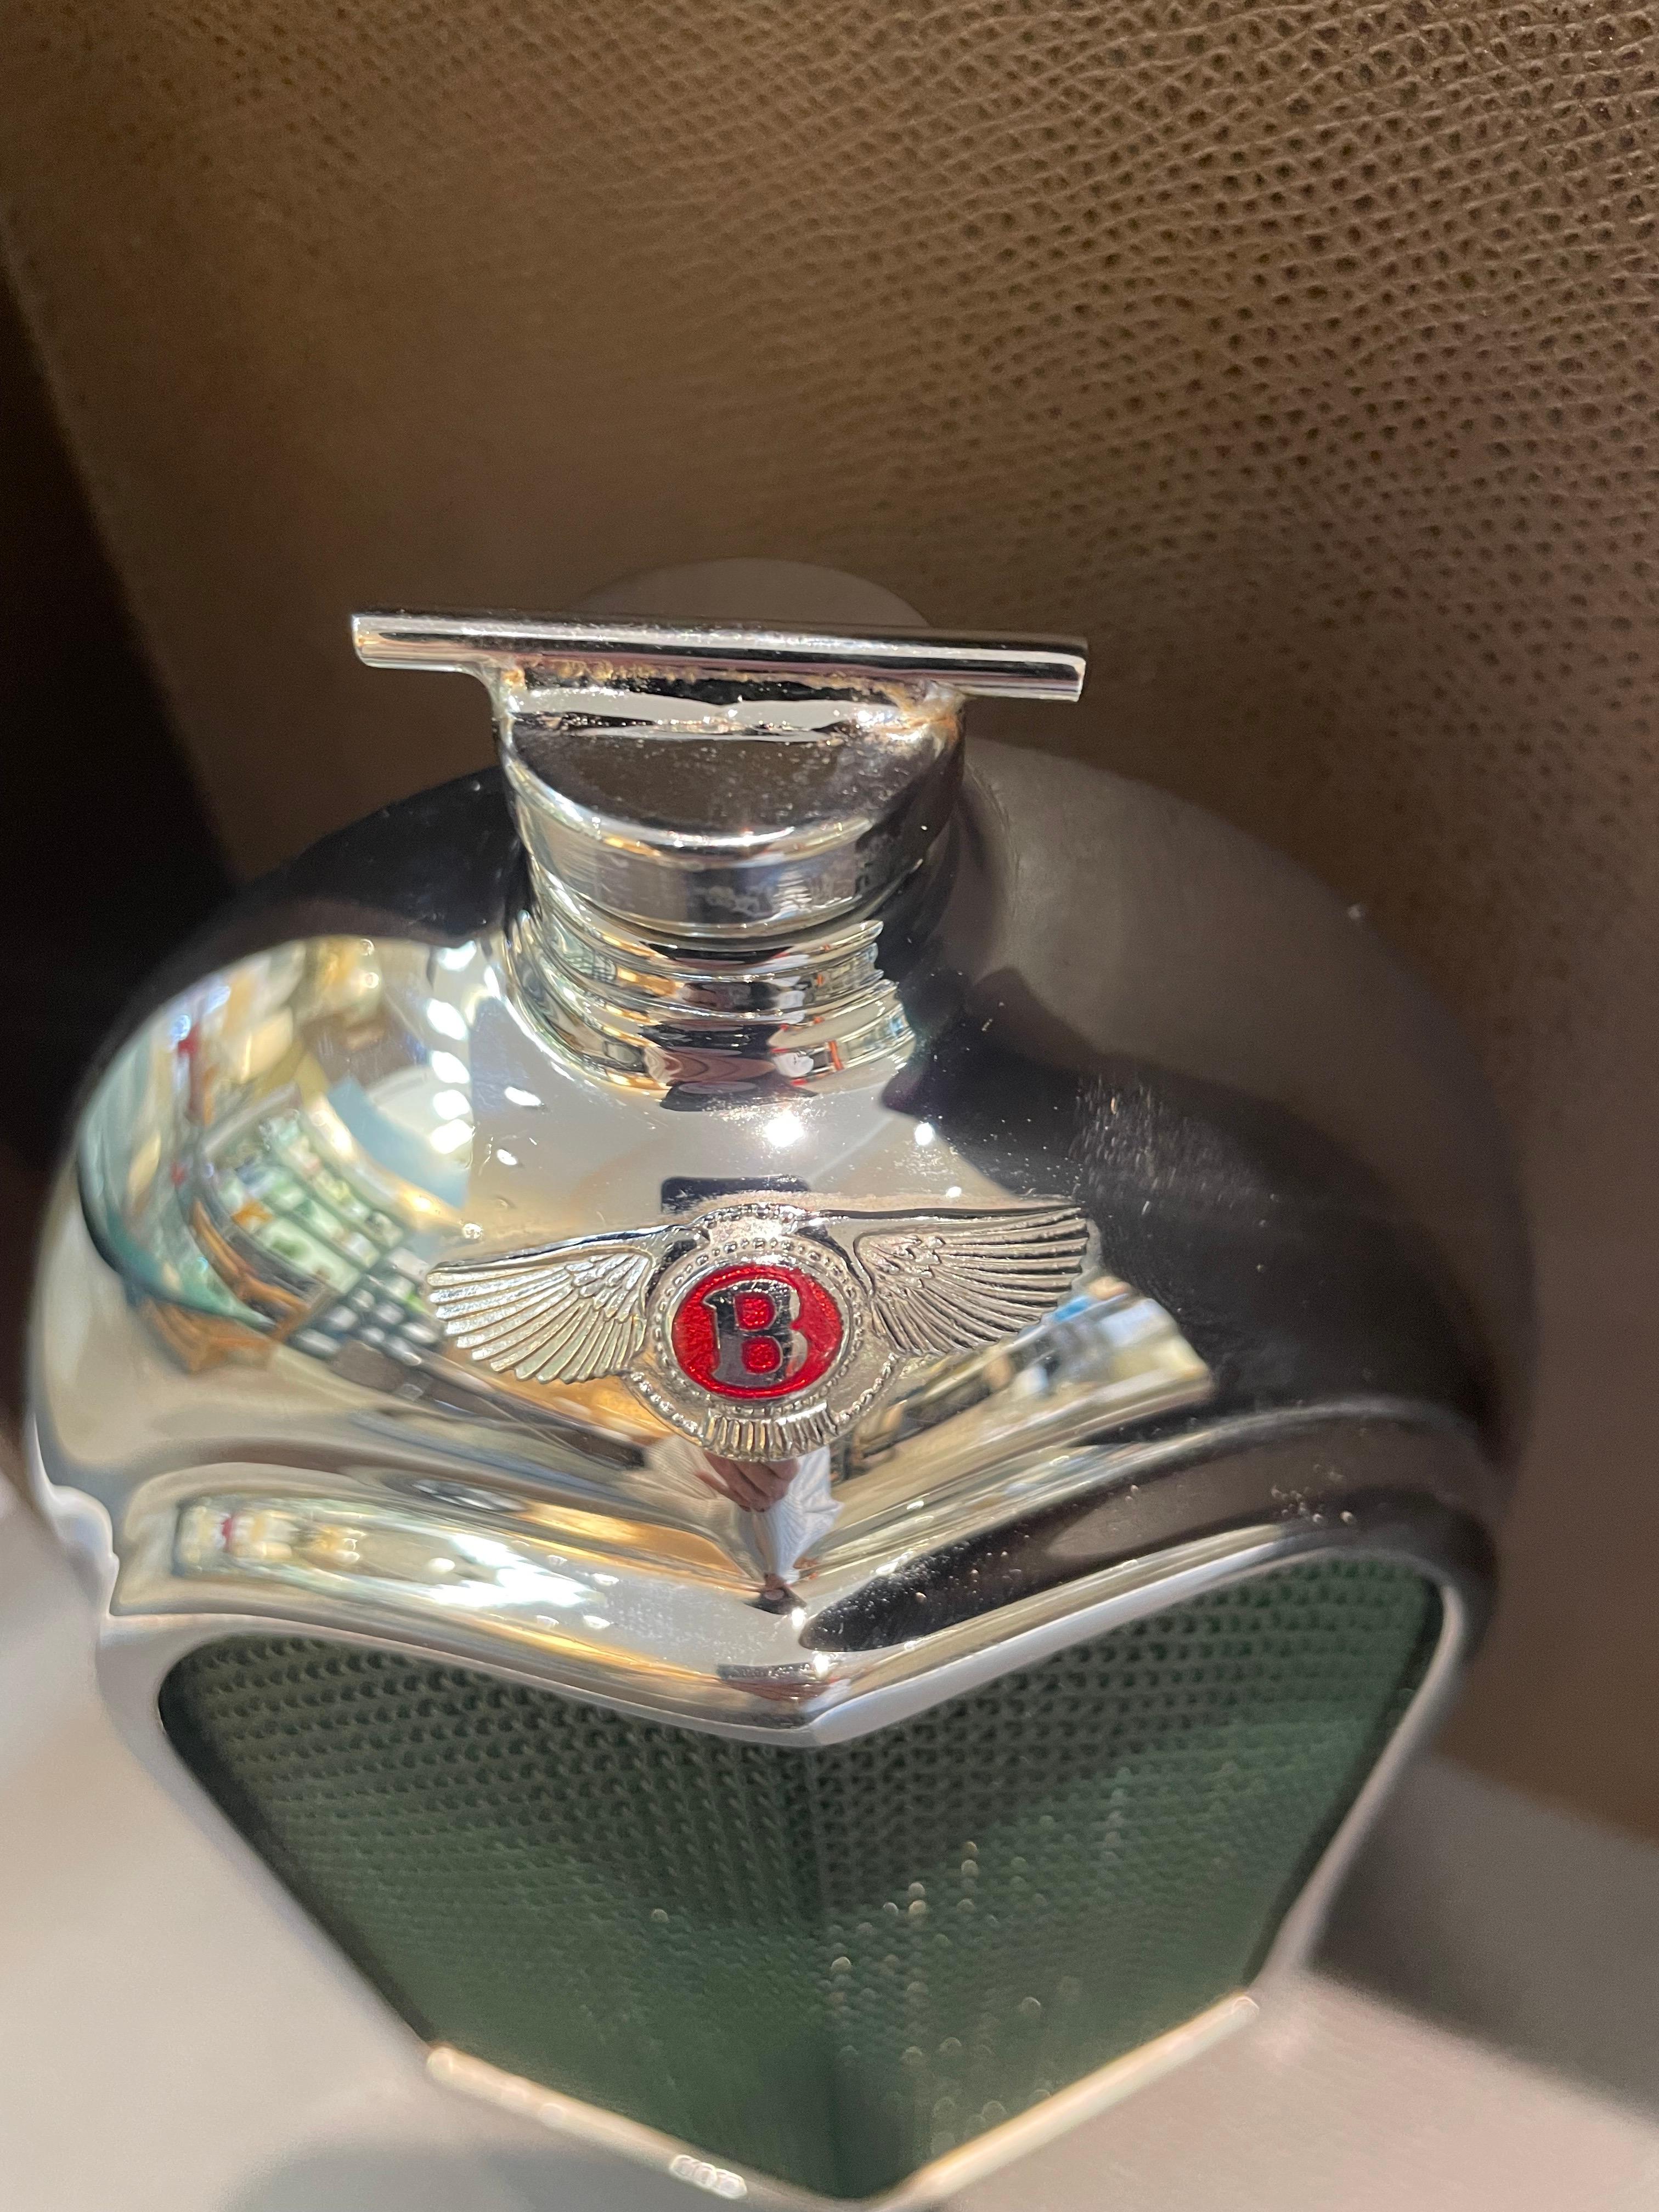 Iconic and identifiable car radiators and grills have evolved into objects of beauty. This rare and vintage Ruddspeed decanter is a unique collectible piece in pristine condition. This Bentley decanter is fully functional lined with glass. Heavily